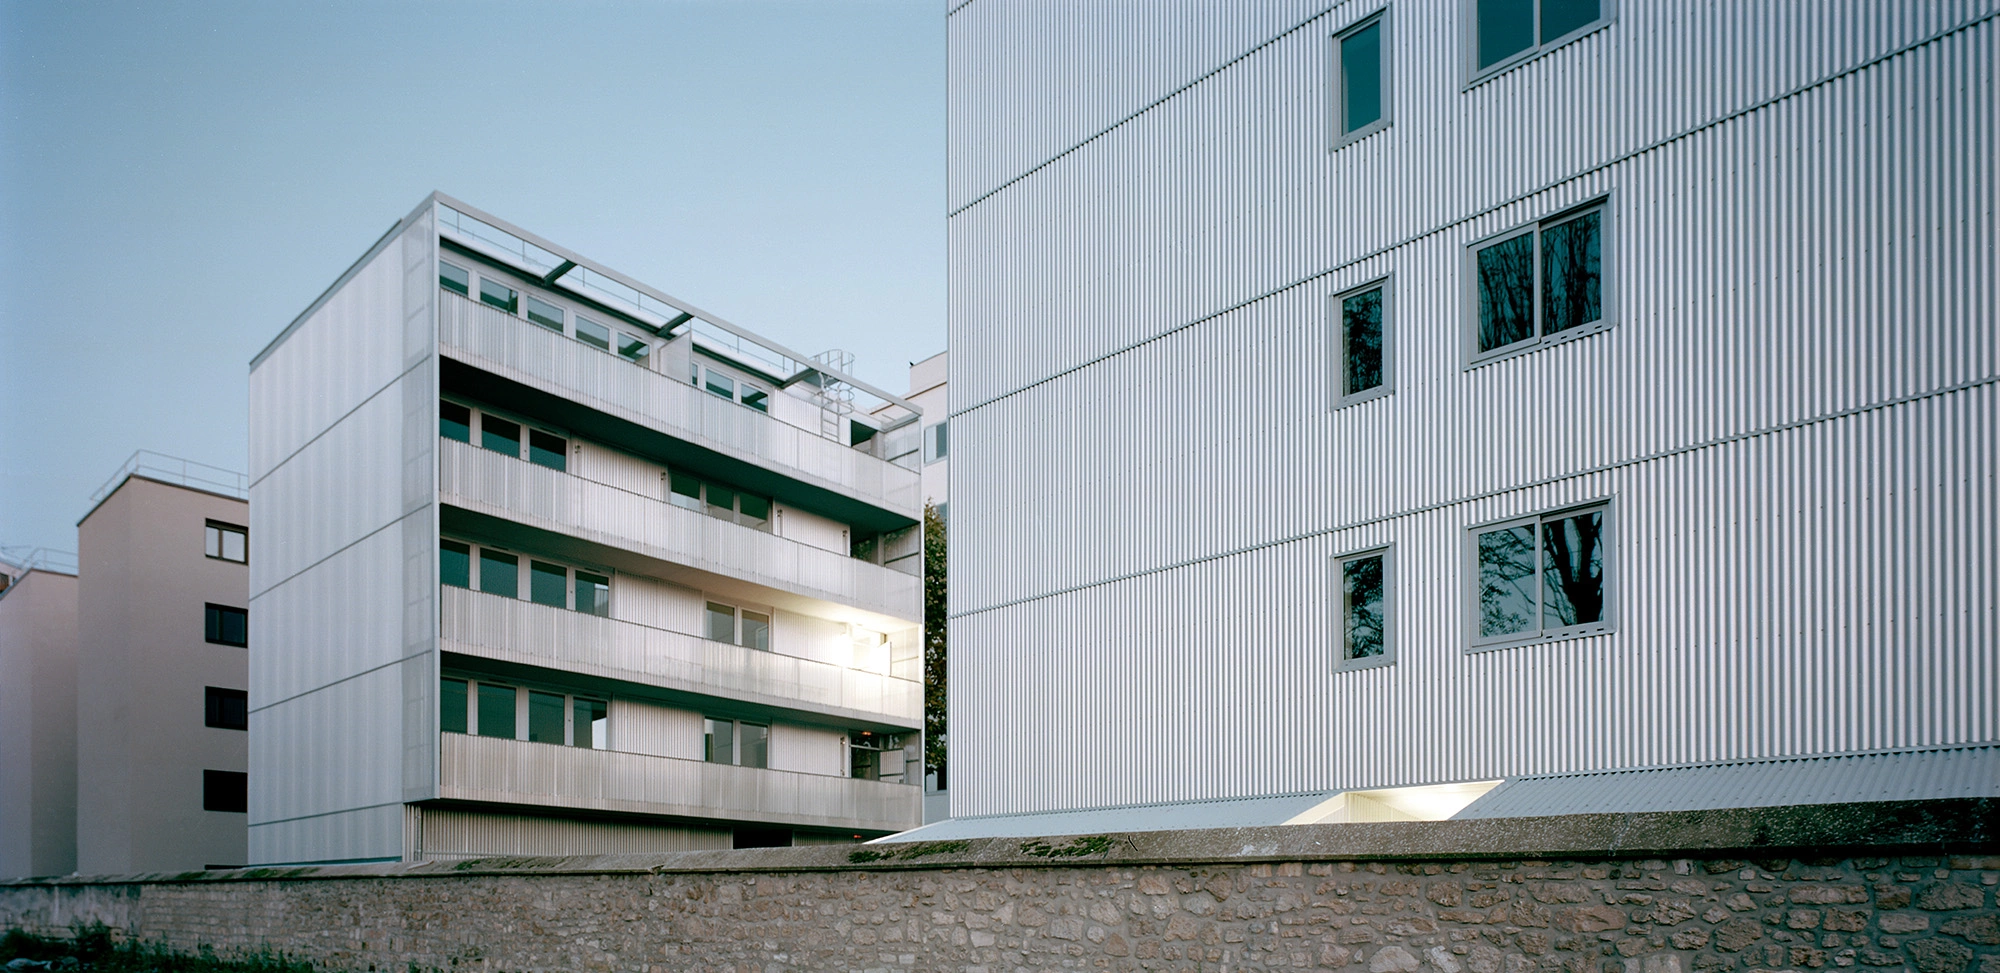 COLLECTIVE HOUSING UNITS - REBIERE